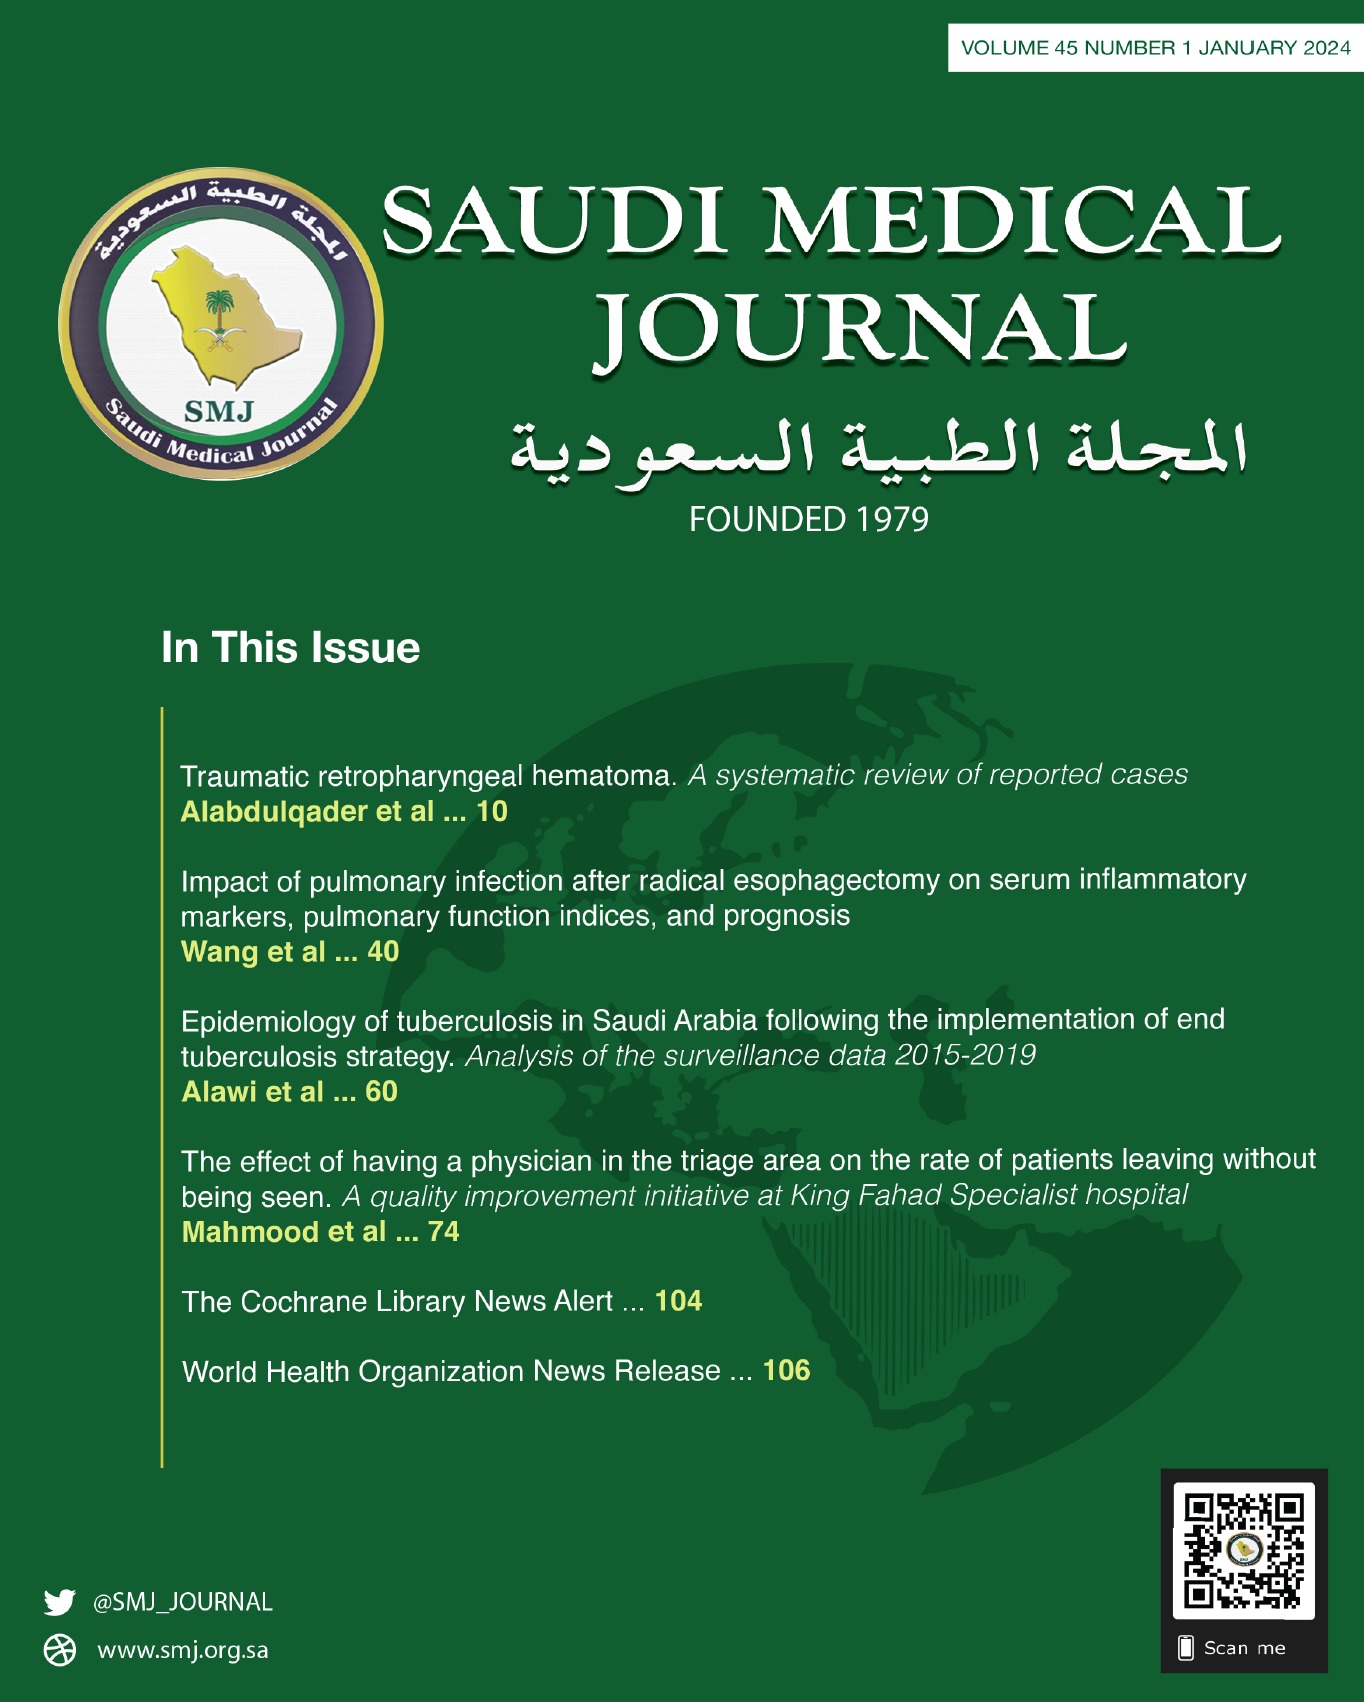 Efficacy and safety of glecaprevir and pibrentasvir in Saudi patients with chronic hepatitis C virus infection at a major tertiary hospital